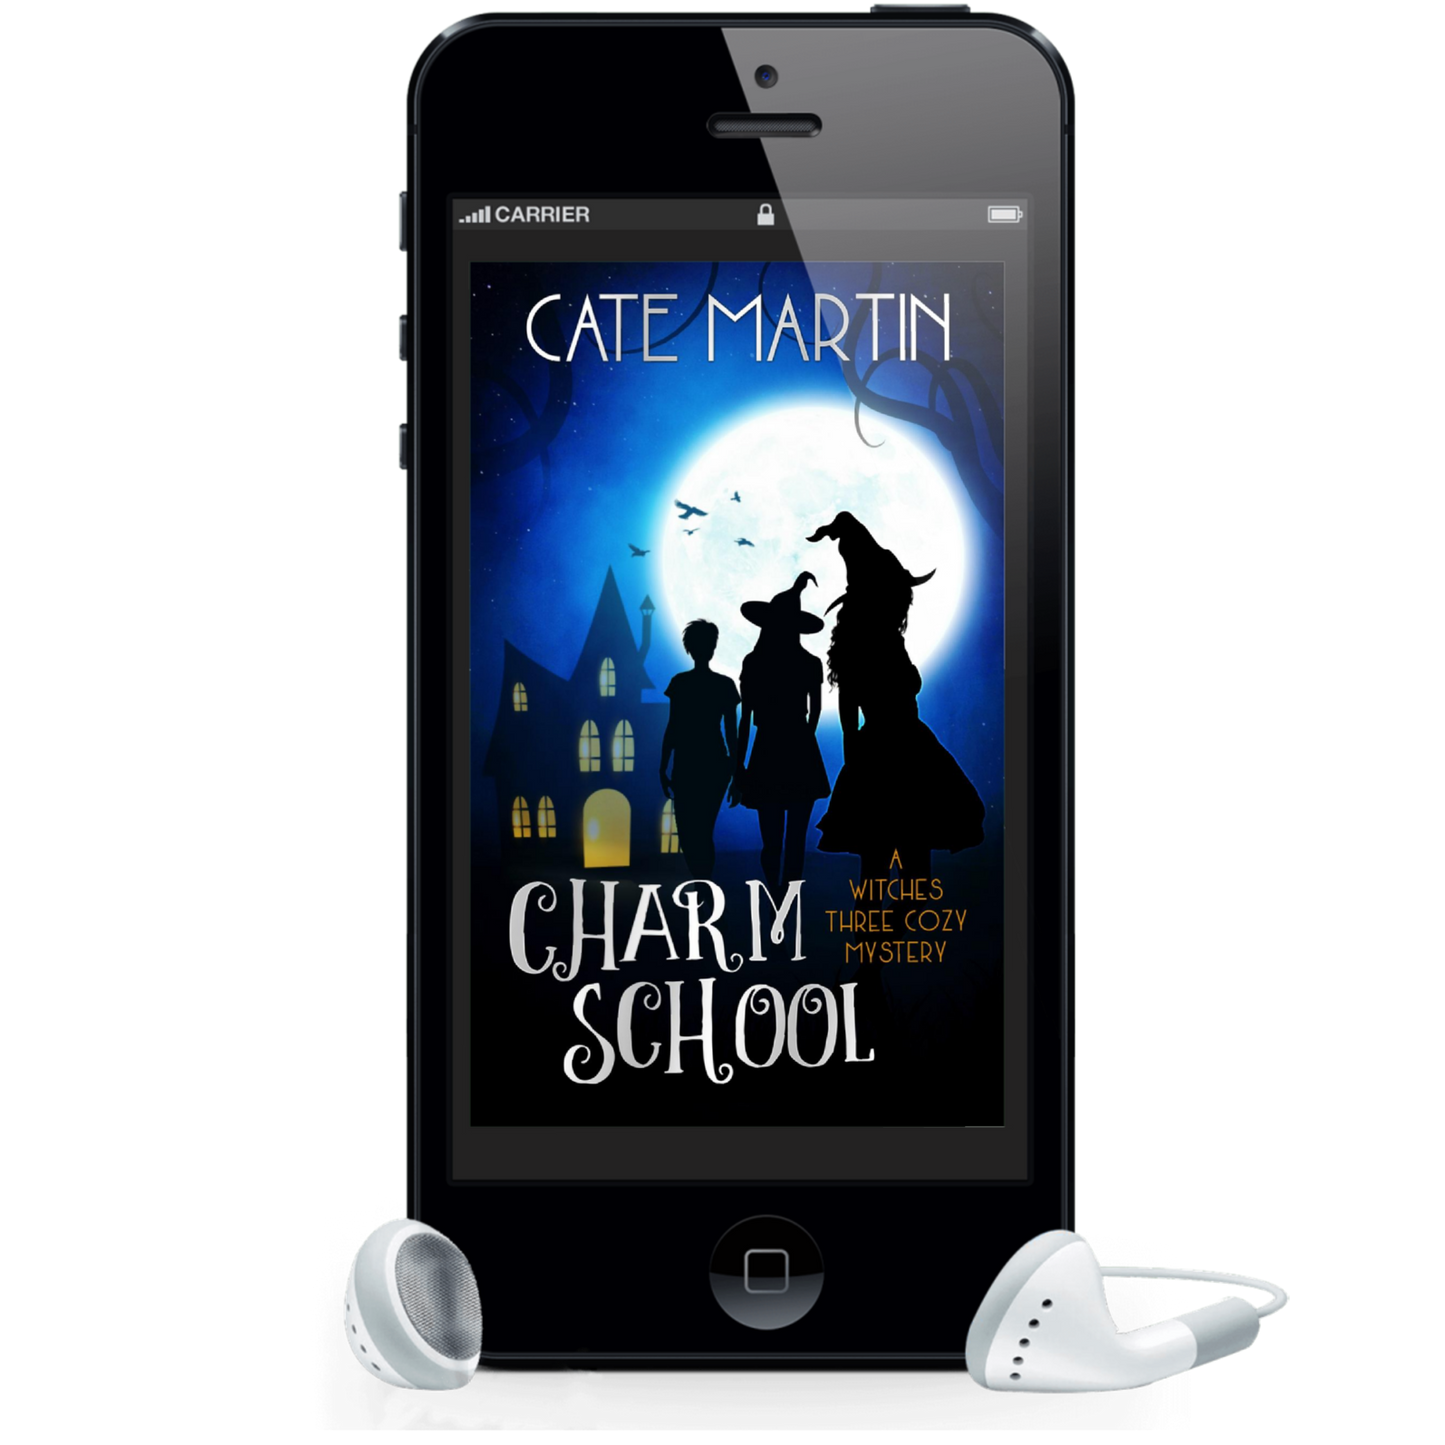 Cover for the audiobook of Charm School: A Witches Three Cozy Mystery.